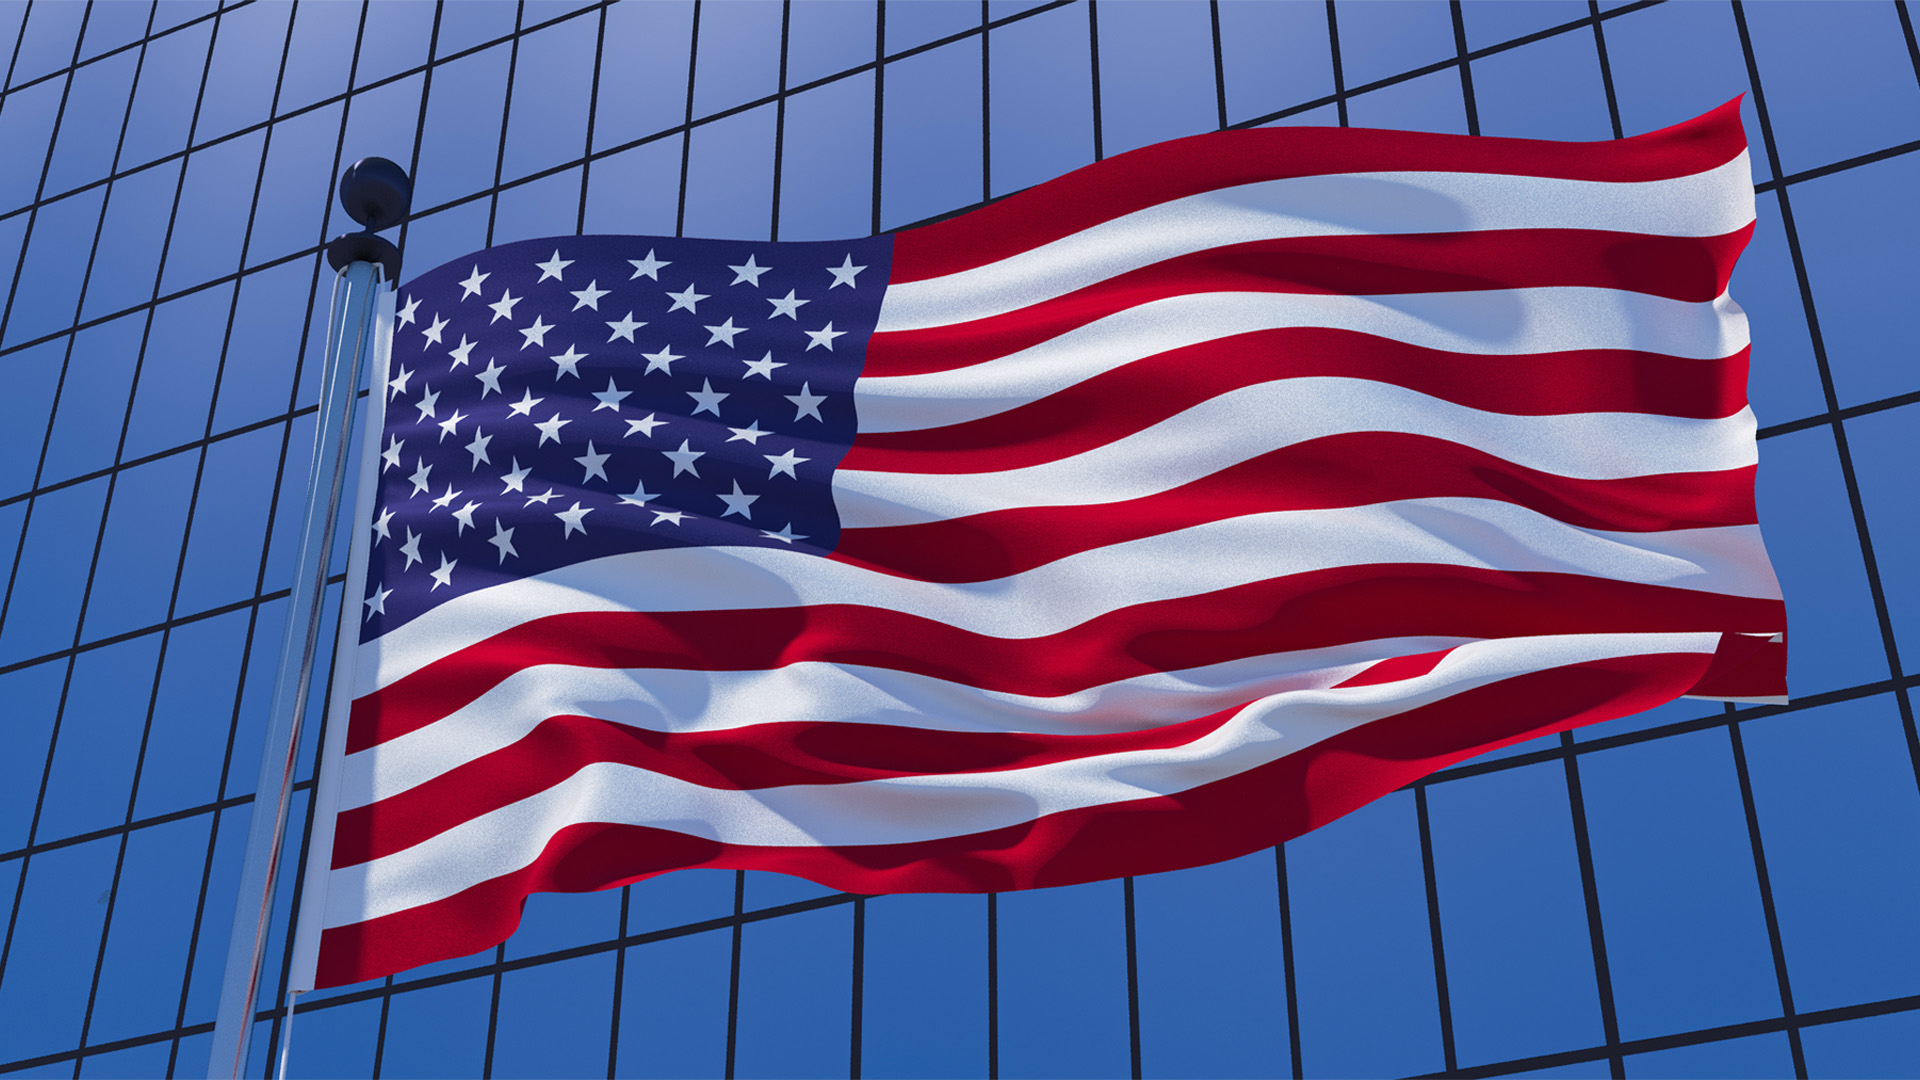 United States of America flag on skyscraper building background.